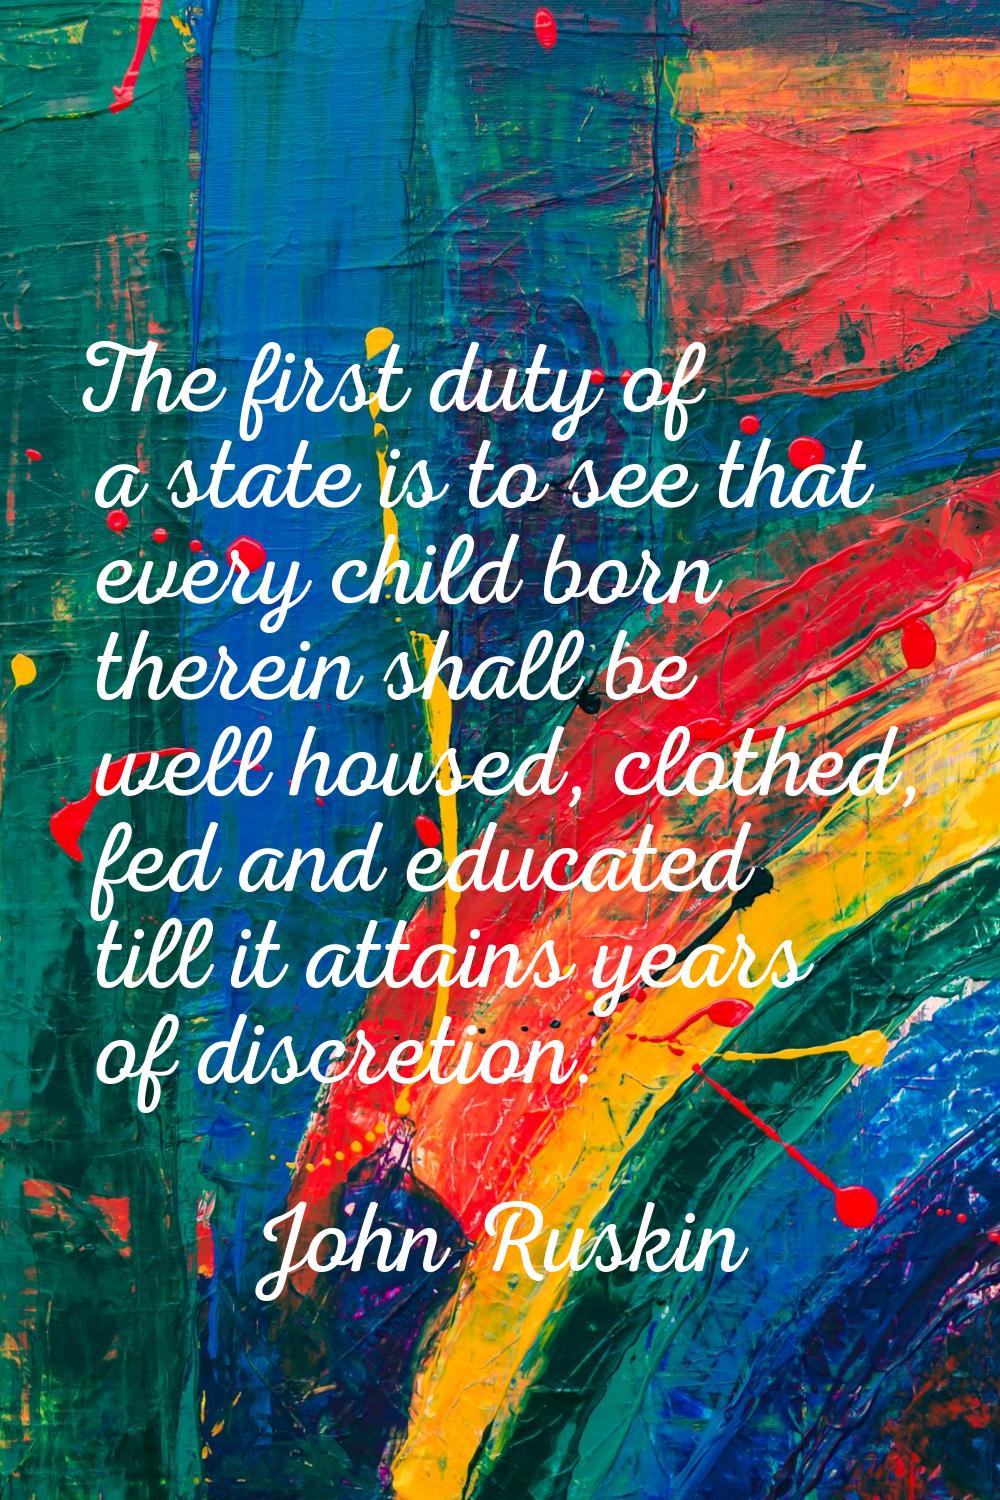 The first duty of a state is to see that every child born therein shall be well housed, clothed, fe